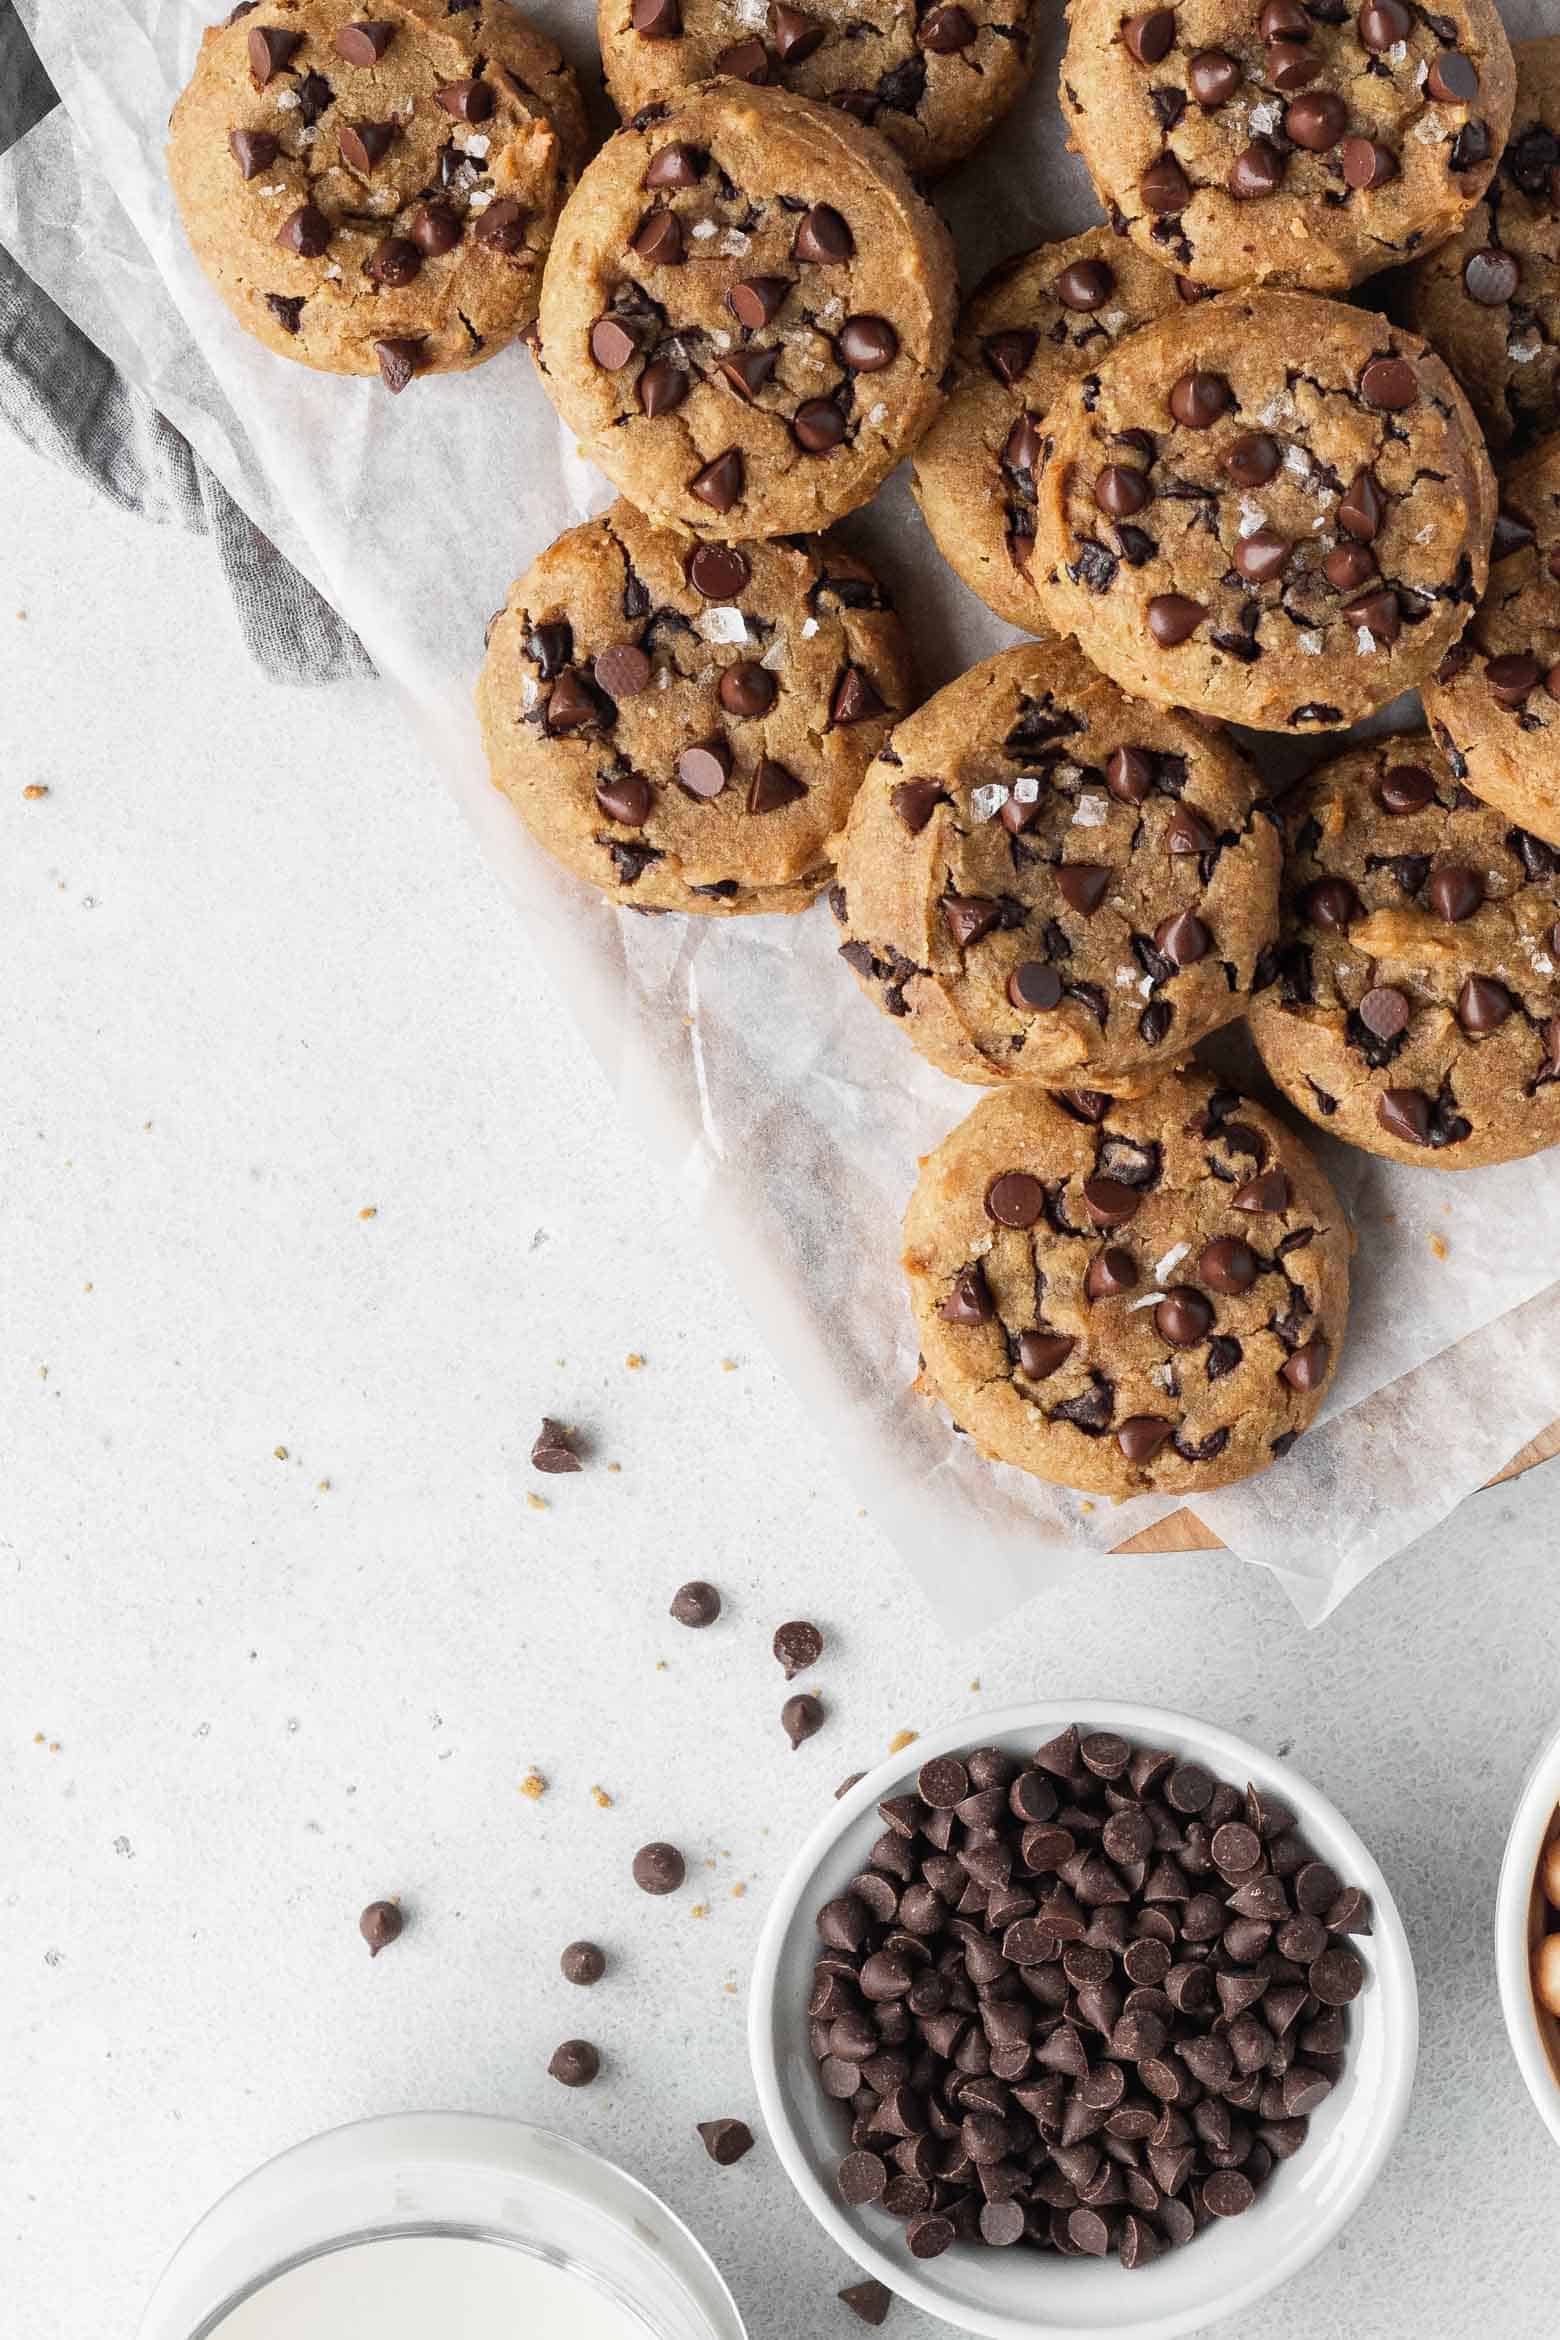 Many gluten-free chocolate chip cookies on parchment paper